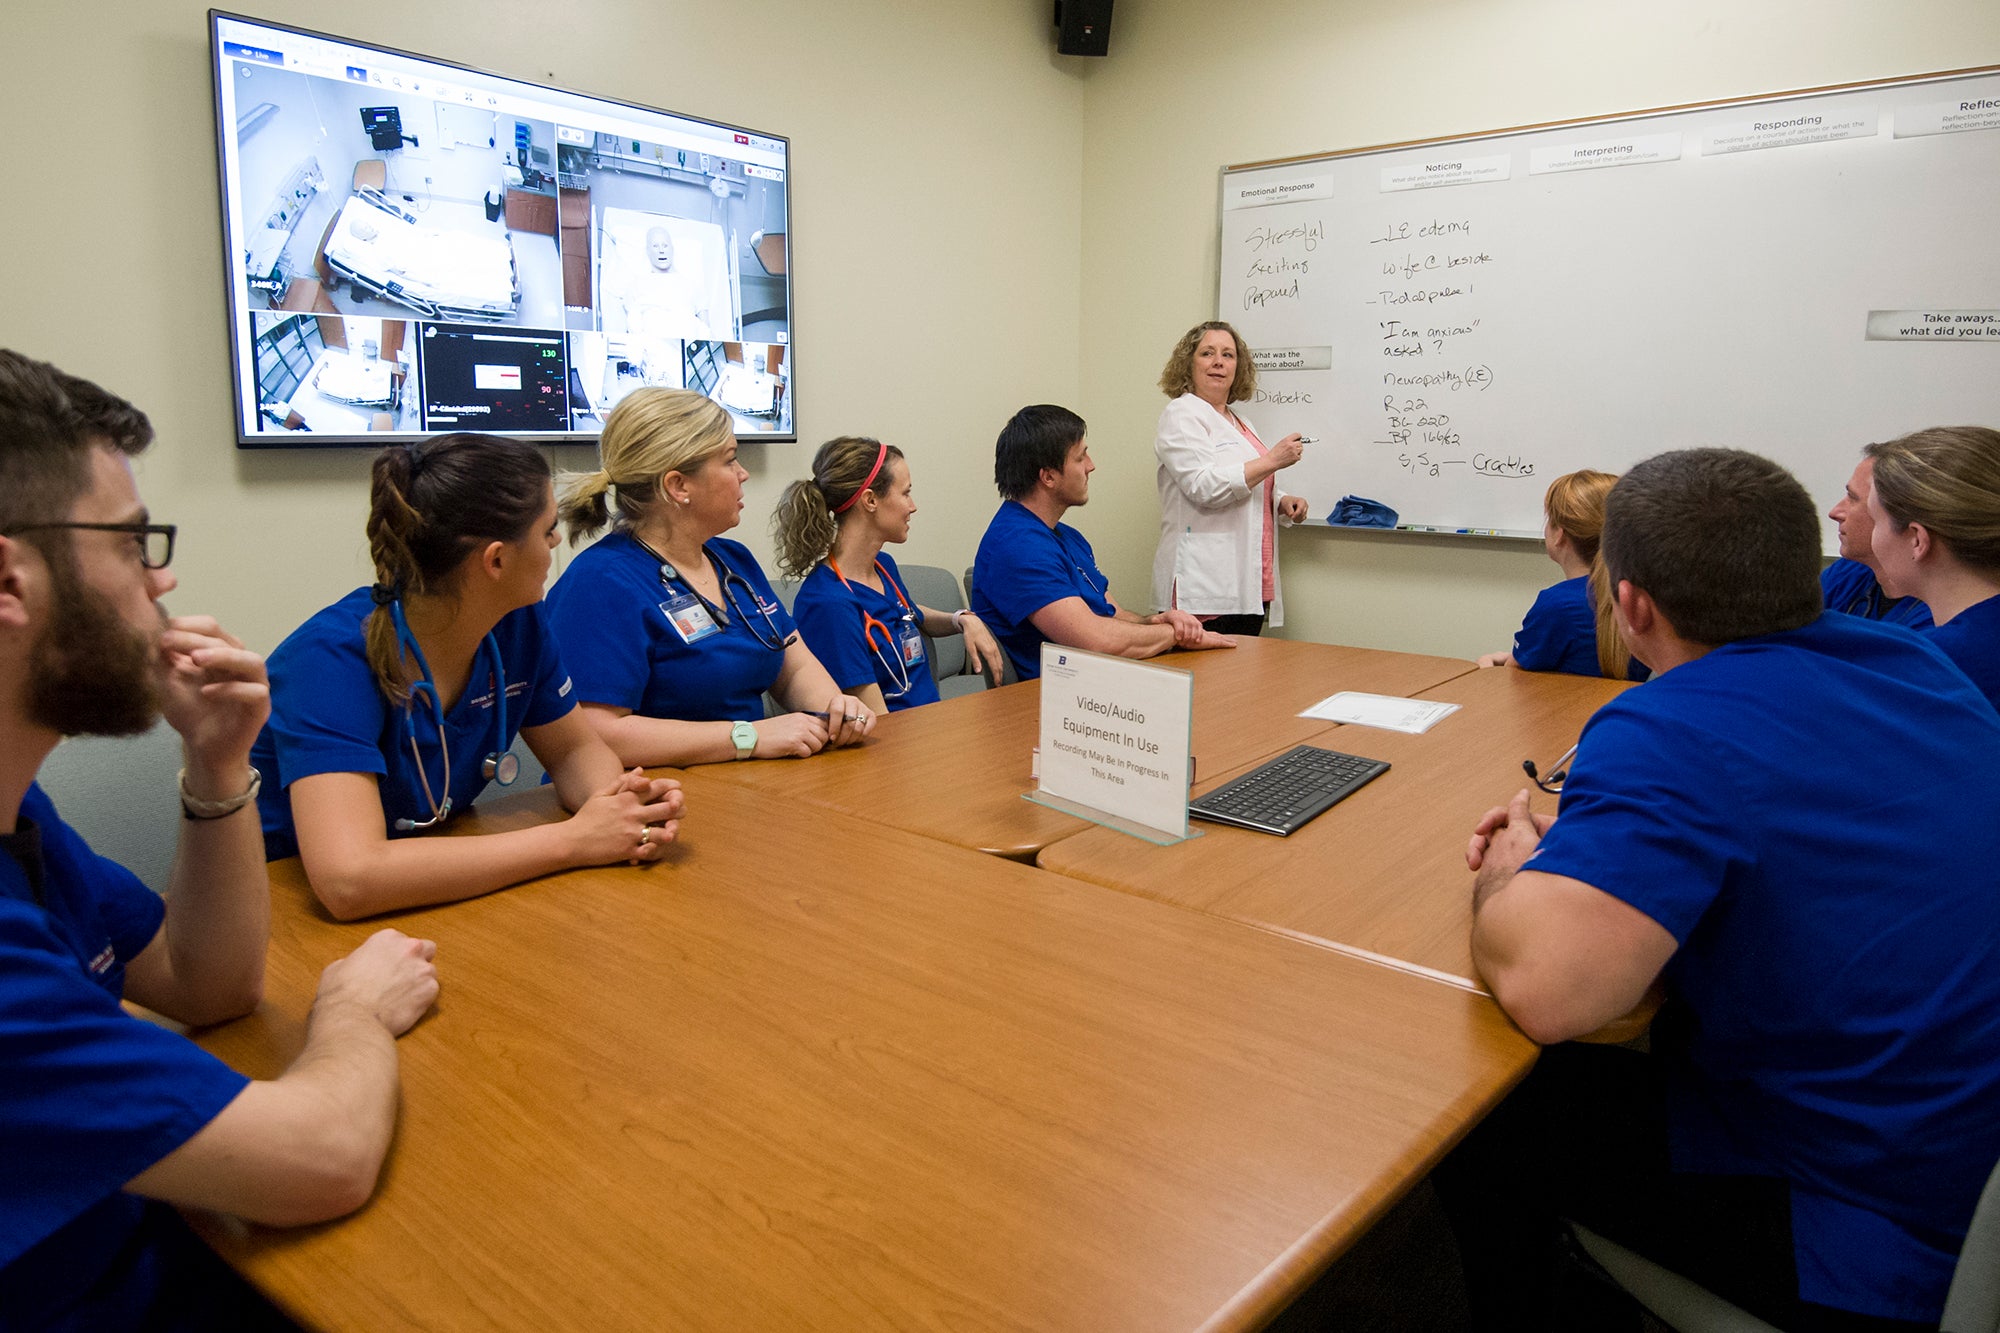 A professor writes on a whiteboard at the front of a room while a group of students in blue scrubs sit around a conference table.